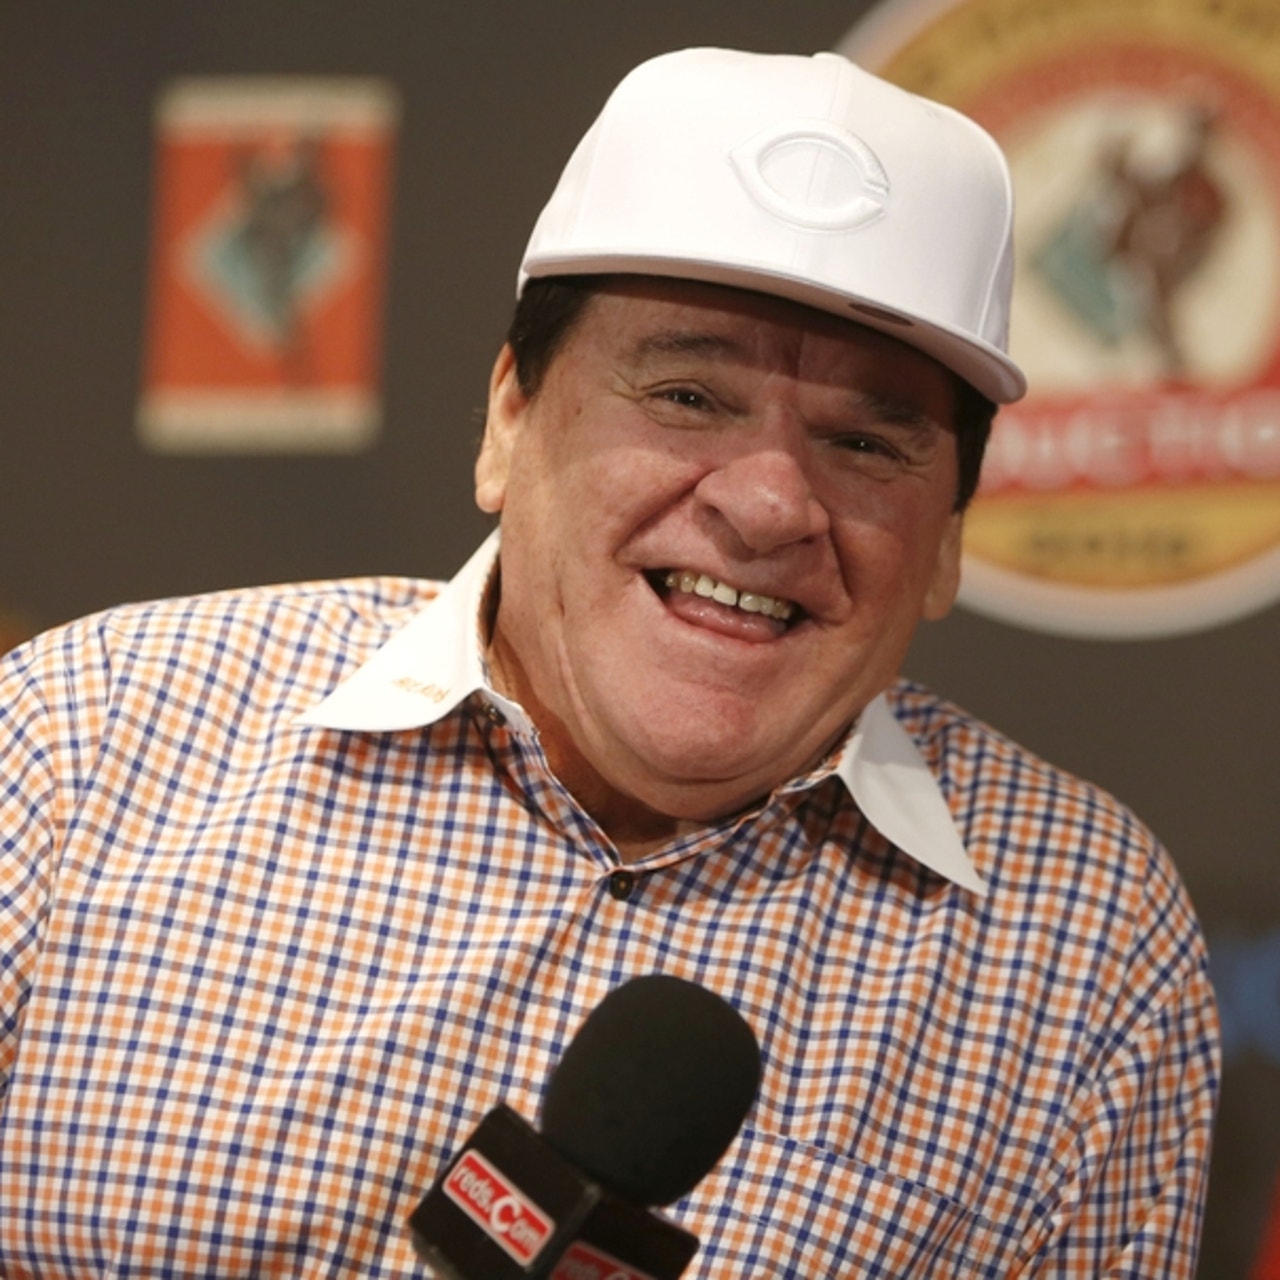 Pete Rose petitions Hall of Fame for inclusion on ballot